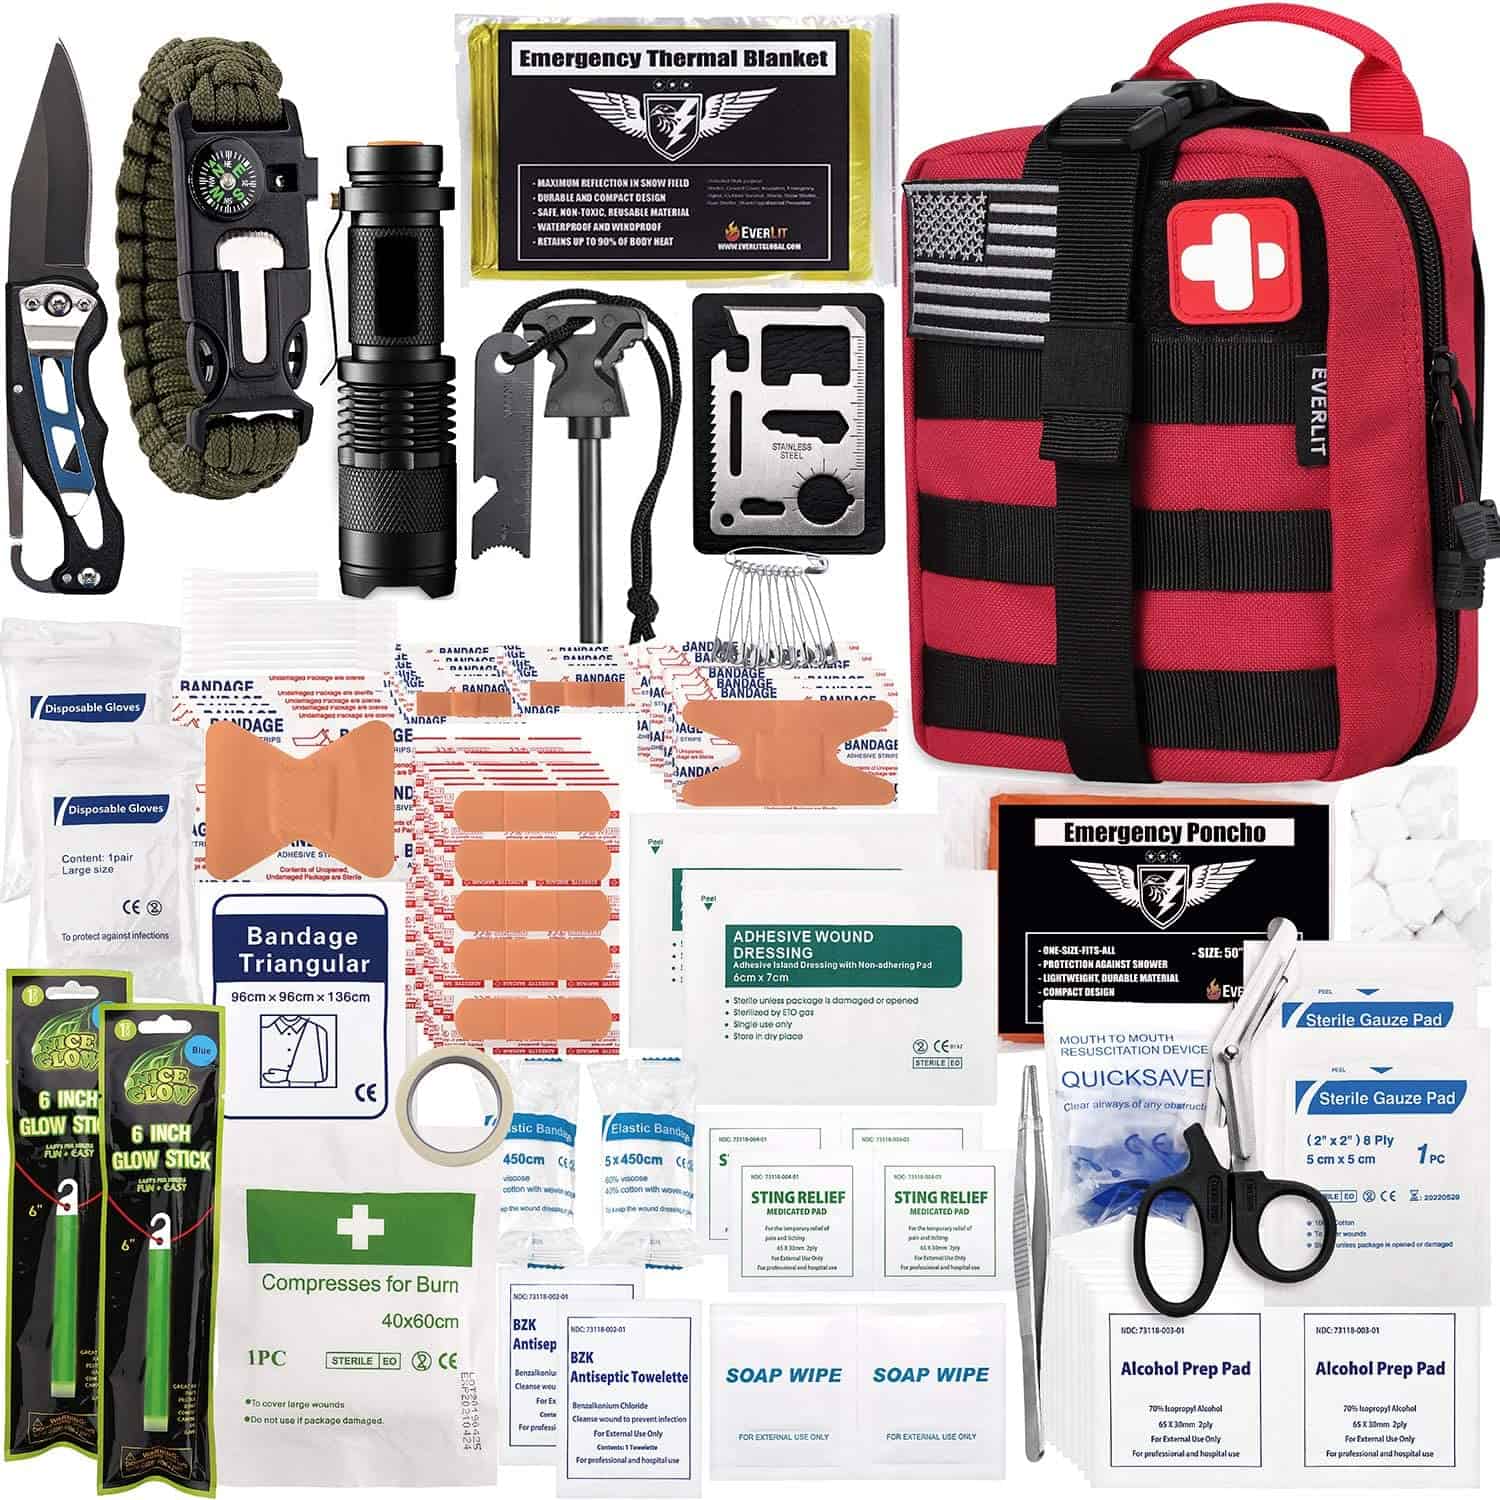 Red Survival First Aid Kit Contains Contains 250 Piece First Aid Kit